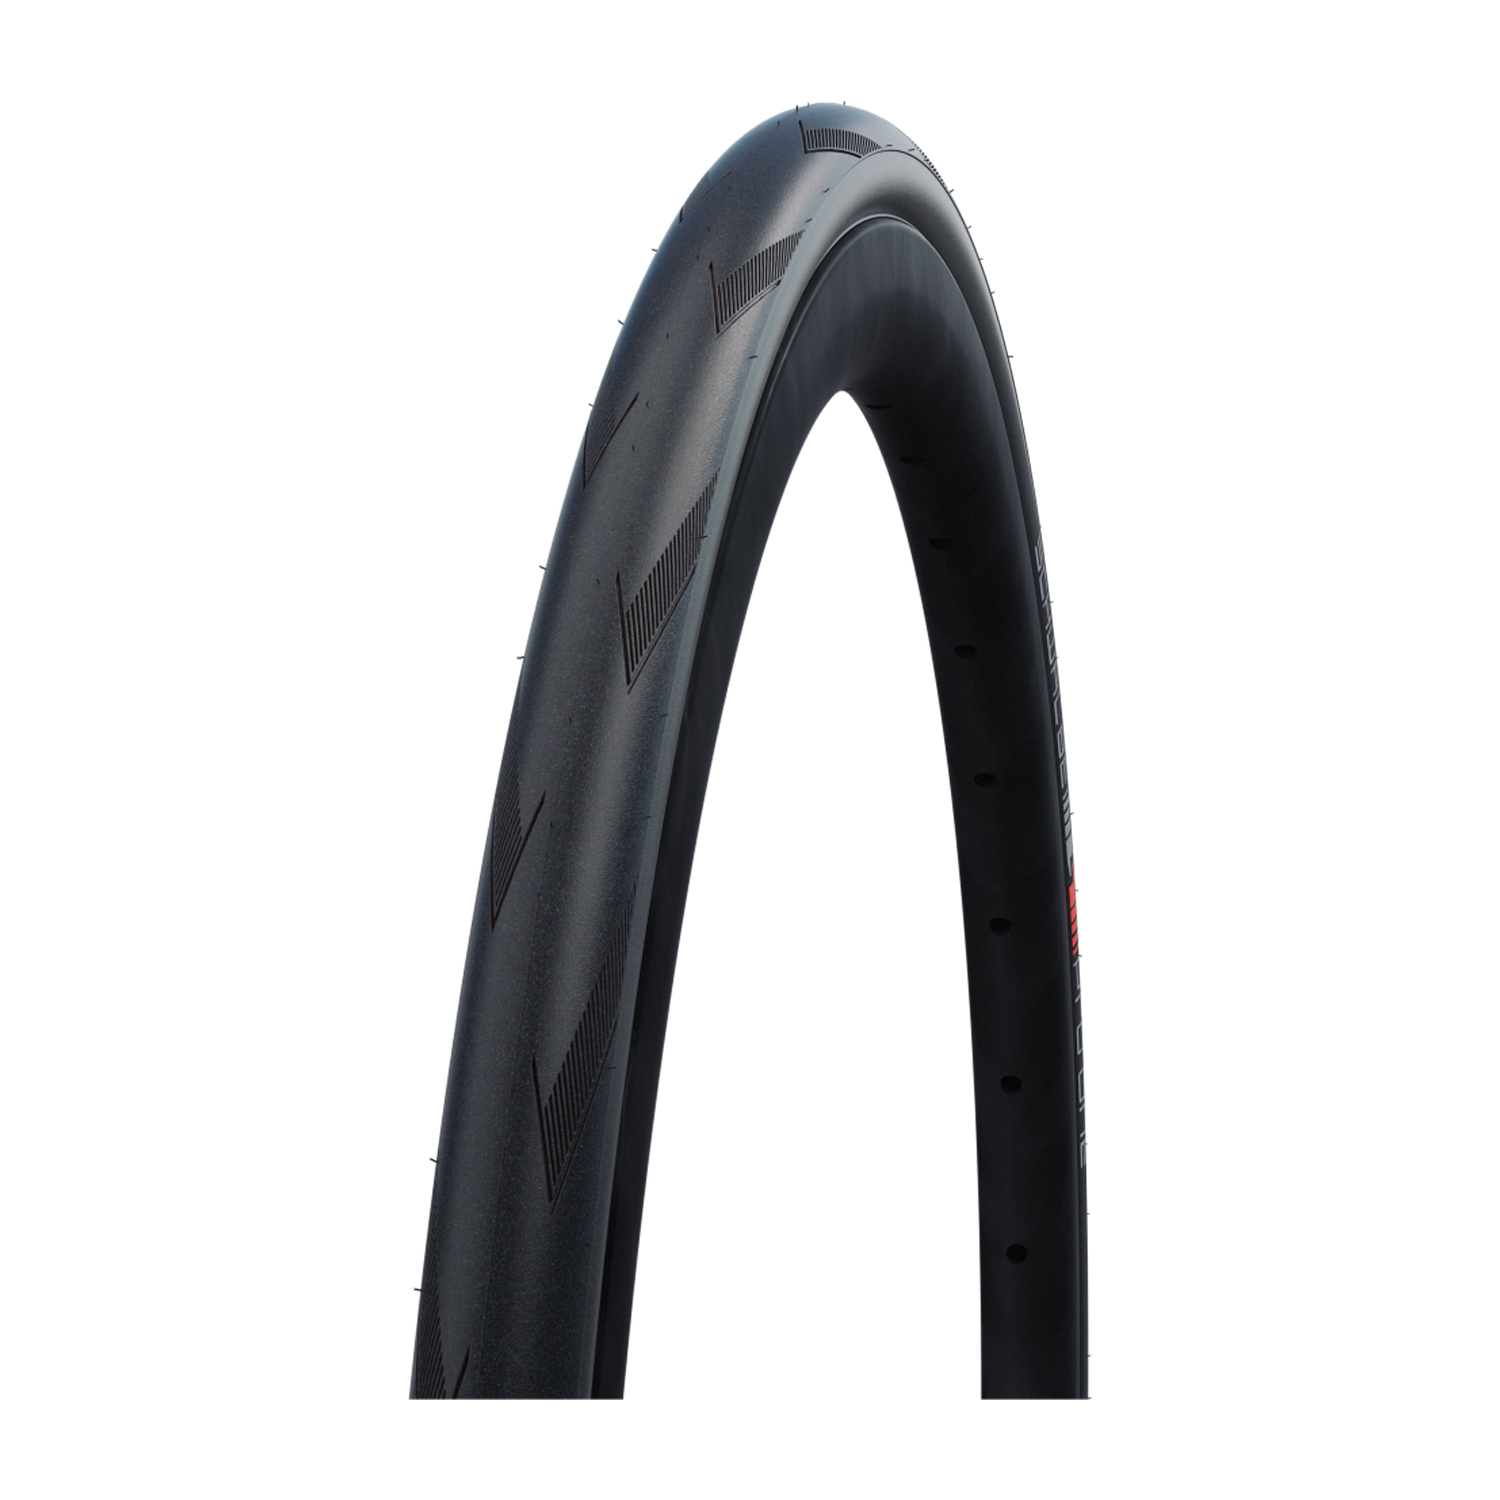 Schwalbe pro one racefiets band